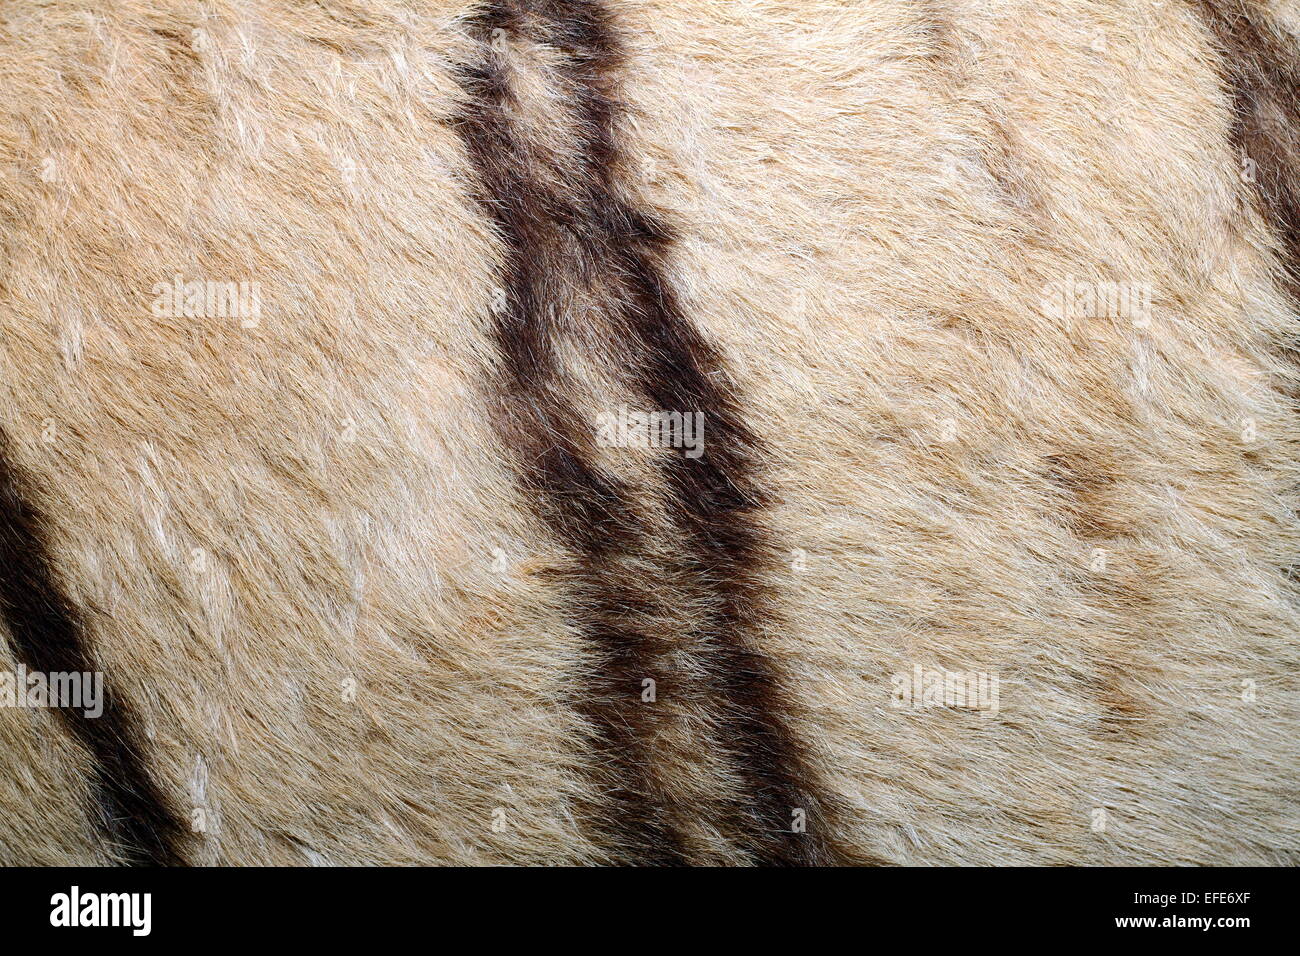 texture of tiger pelt, image taken on a hunting trophy real fur Stock Photo